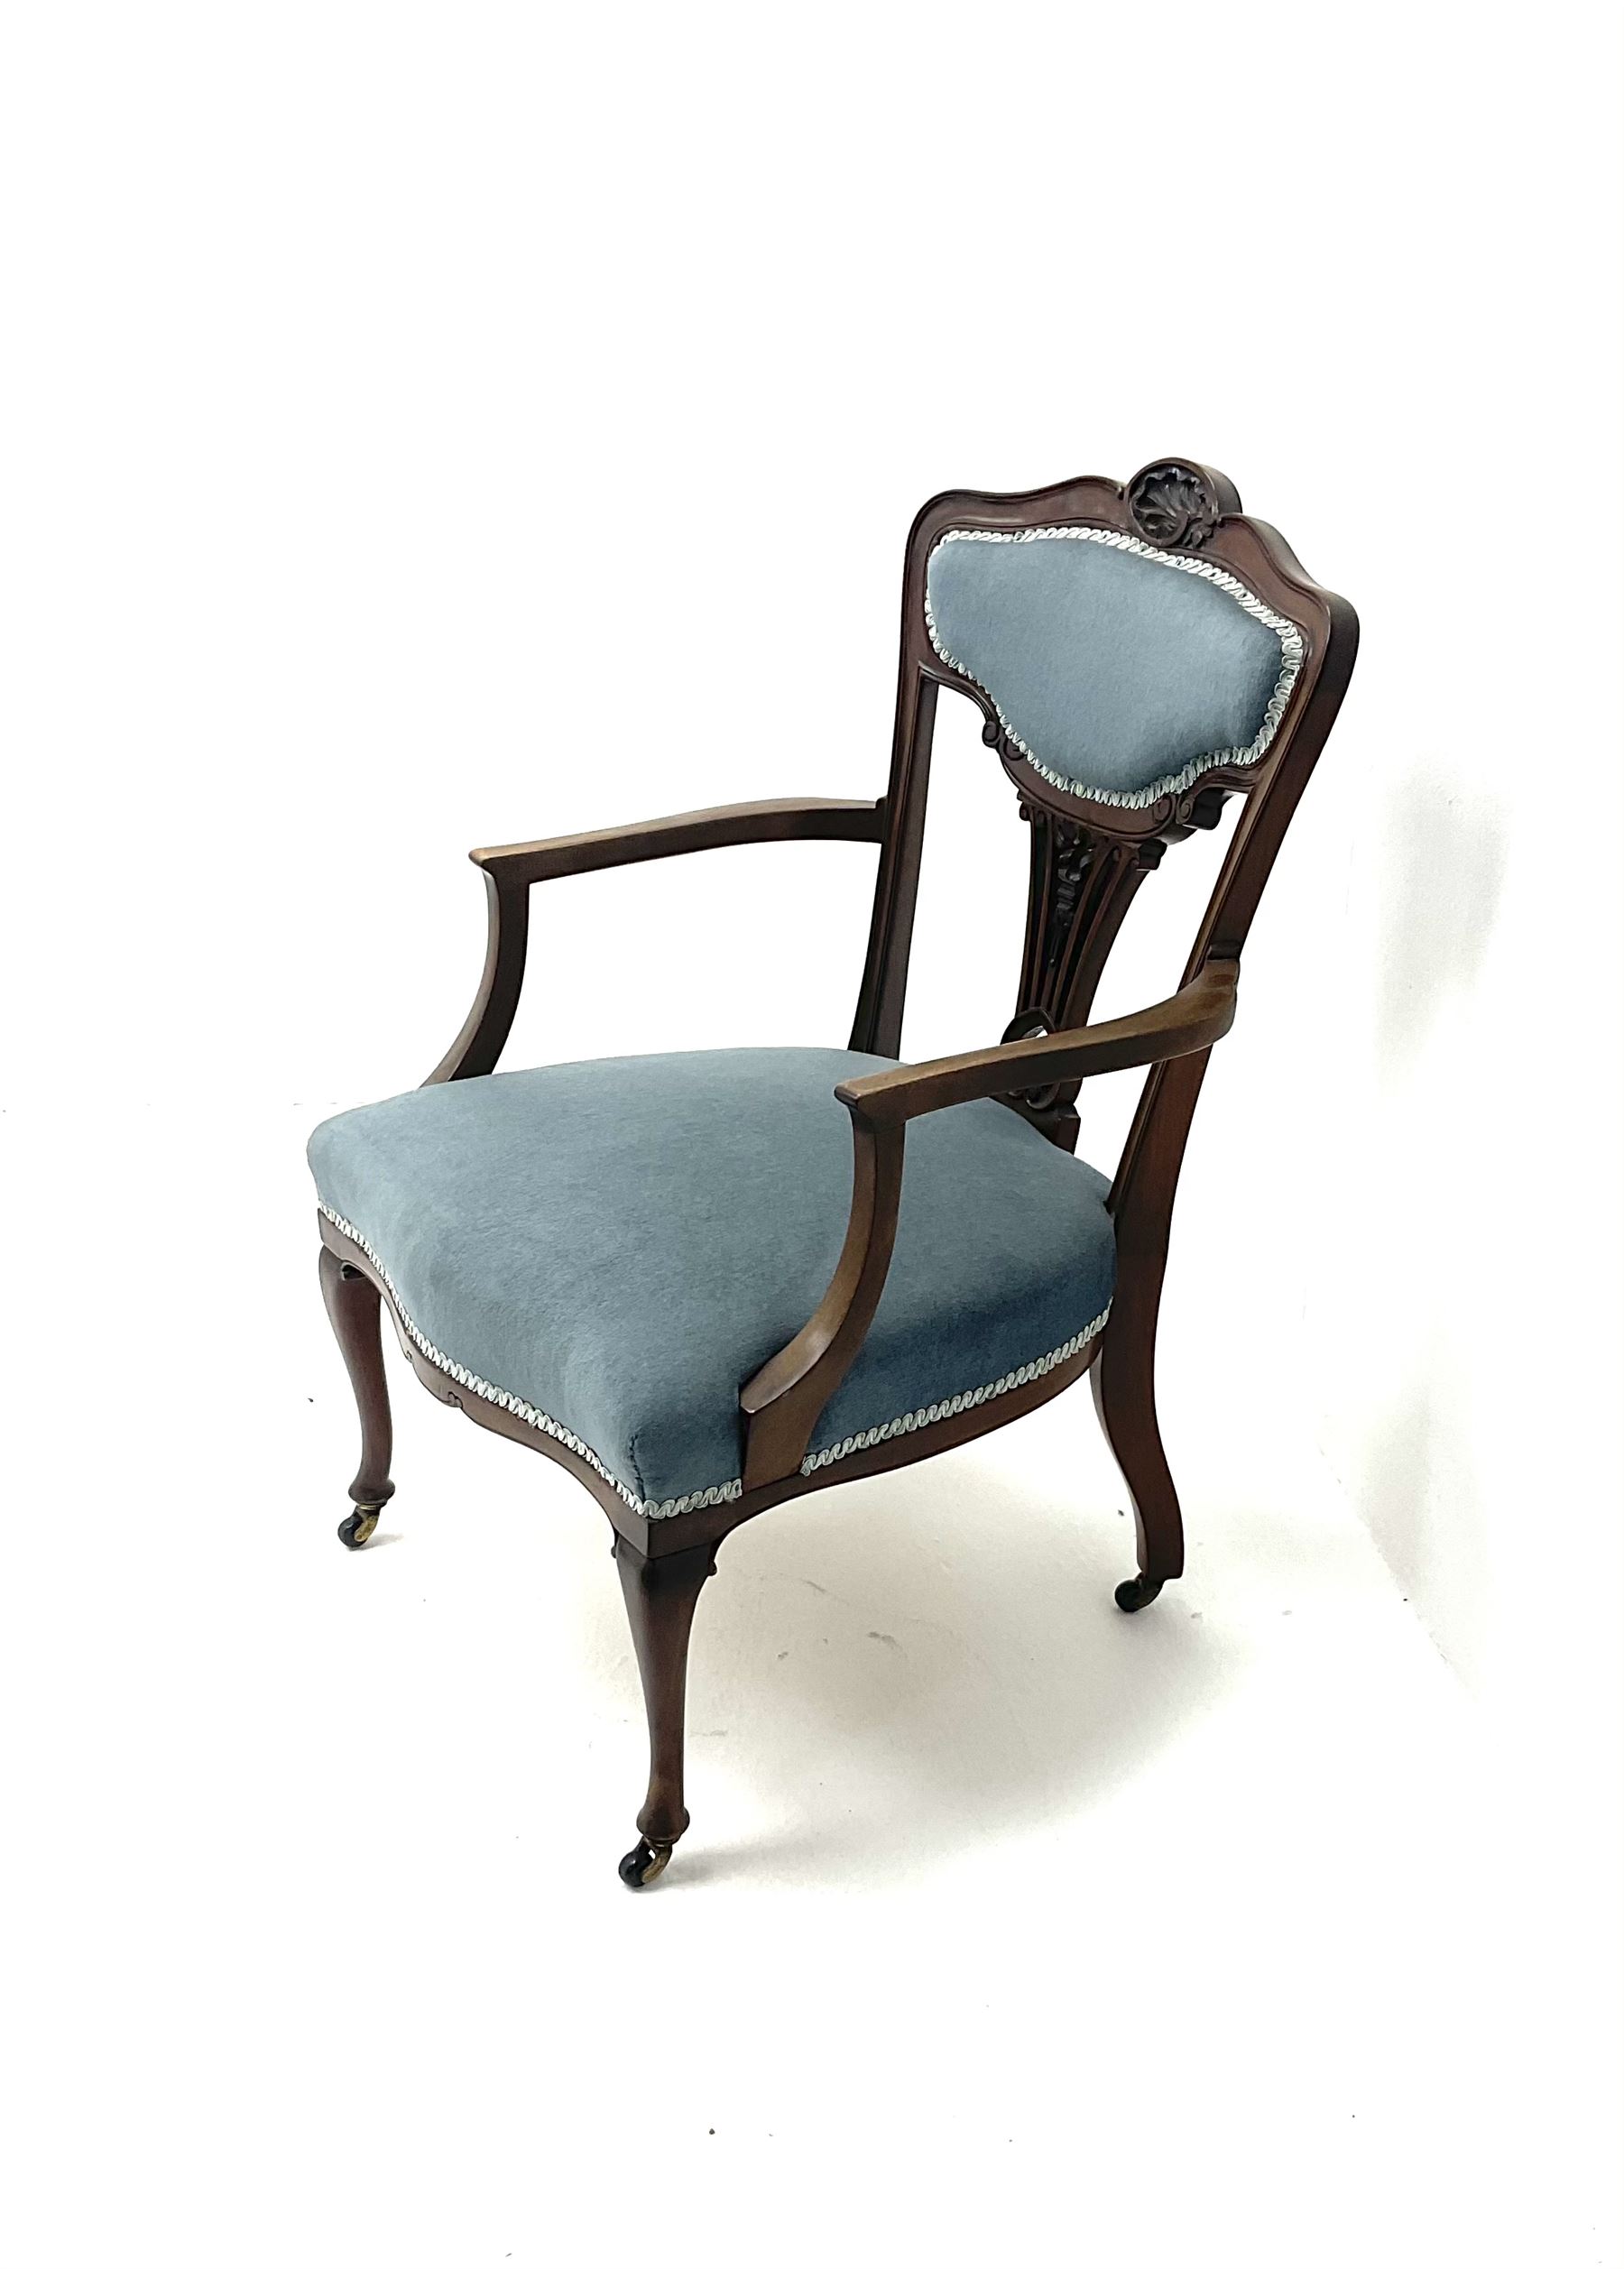 Late Victorian mahogany armchair - Image 2 of 2